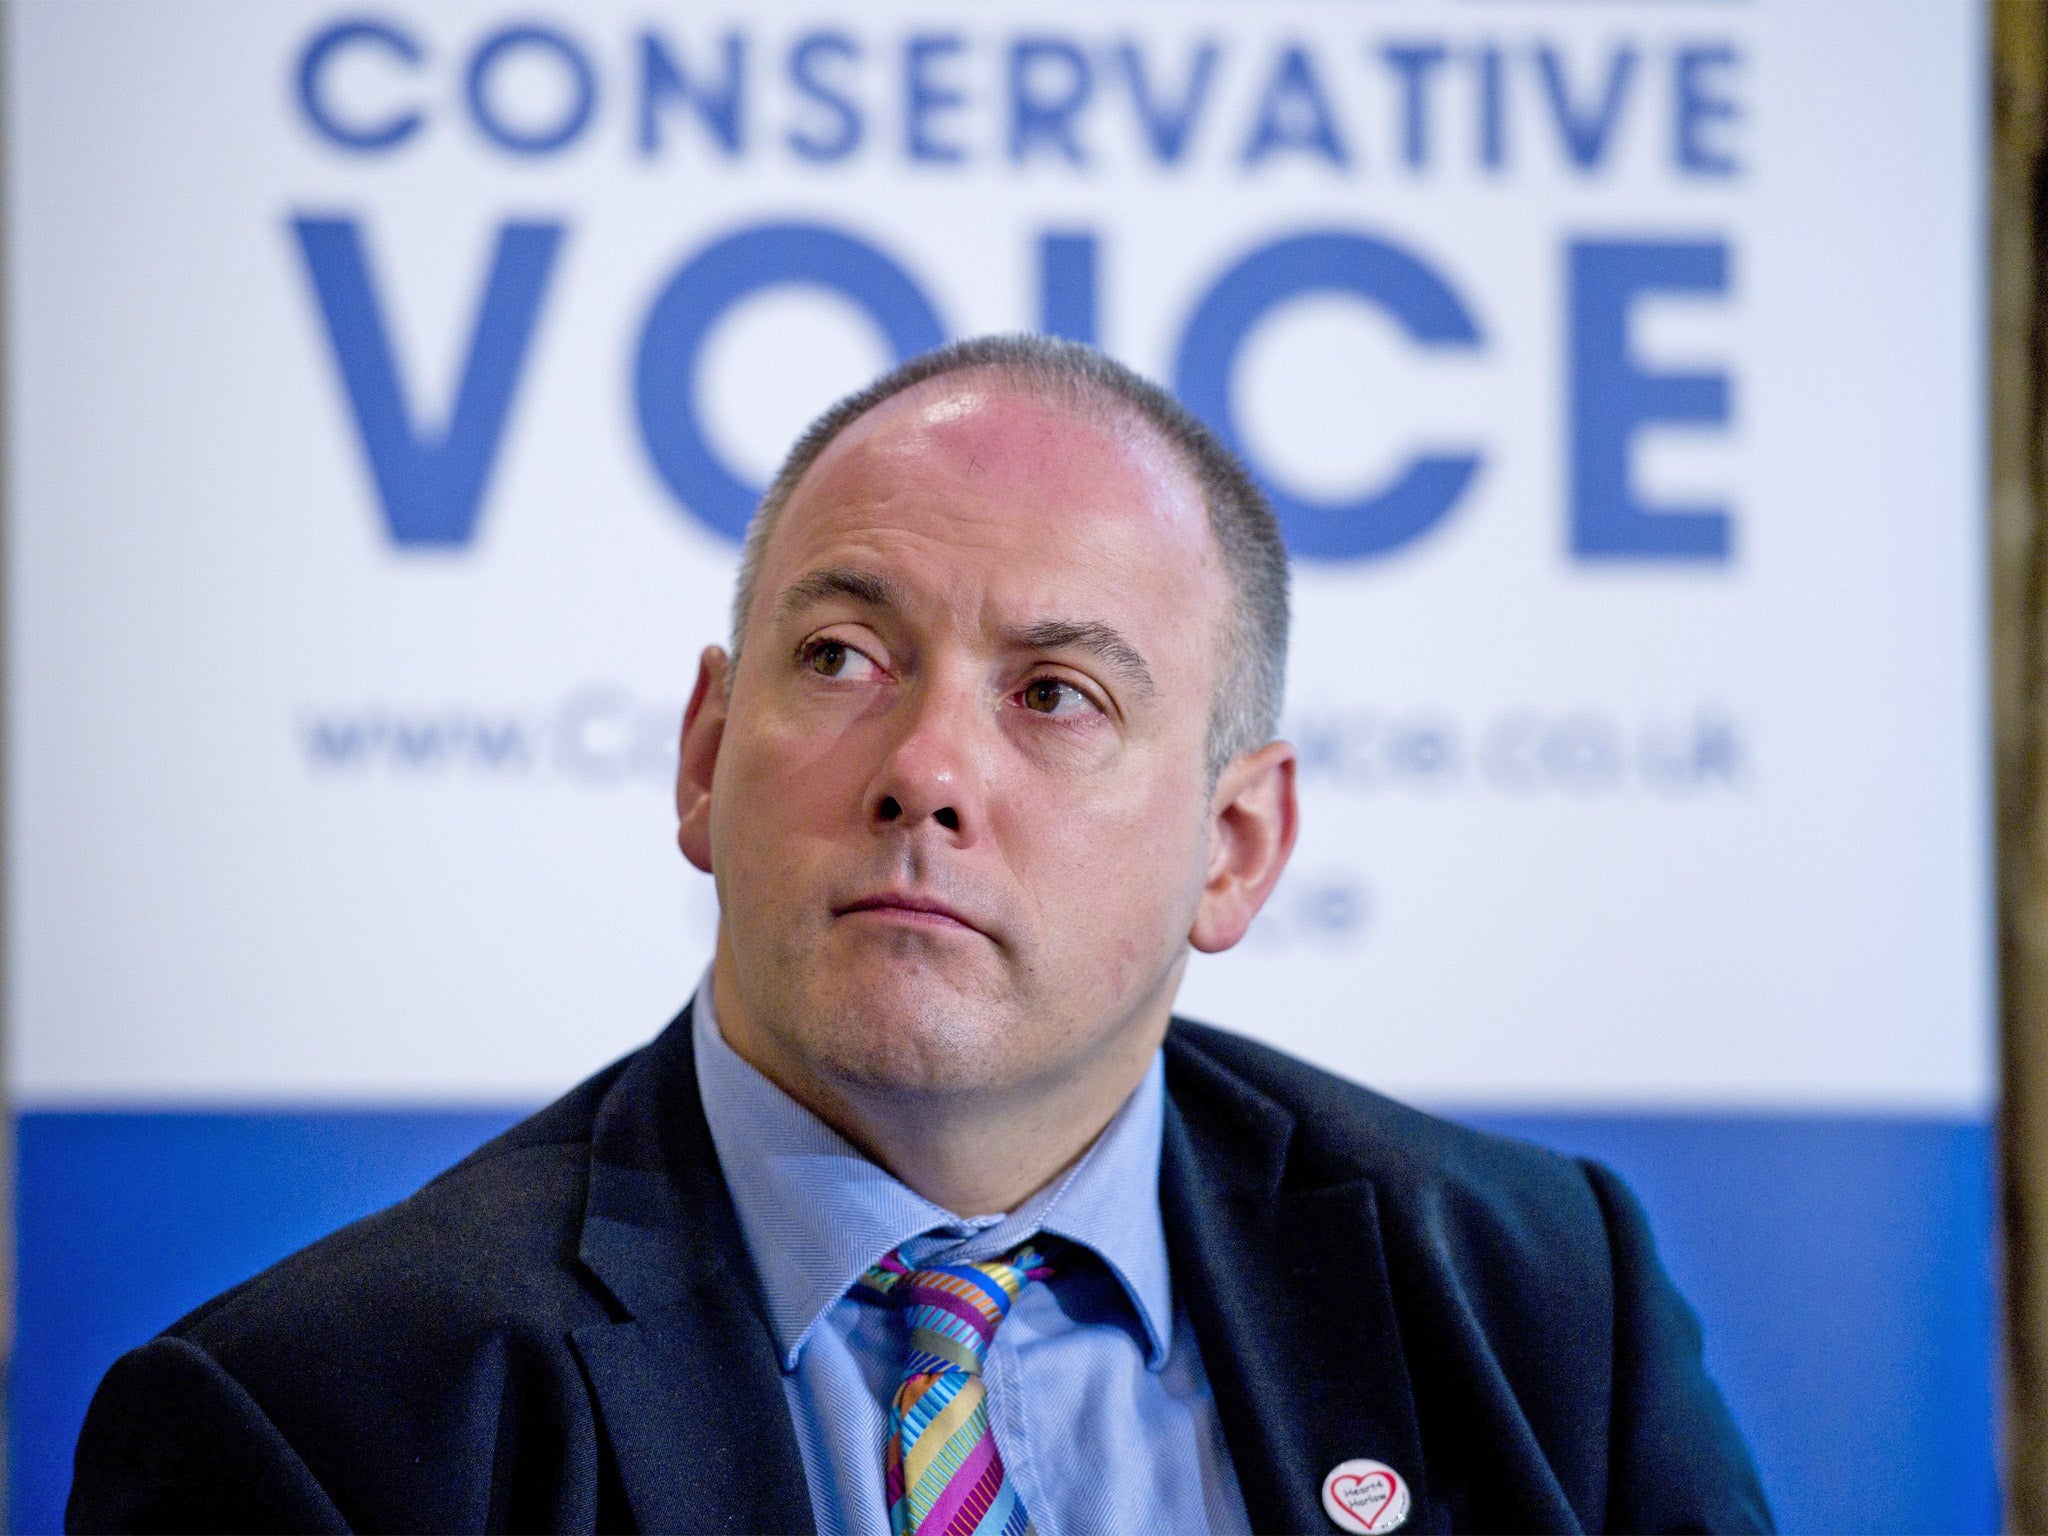 Robert Halfon is allegedly linked with a Ukrainian arrested in Vienna